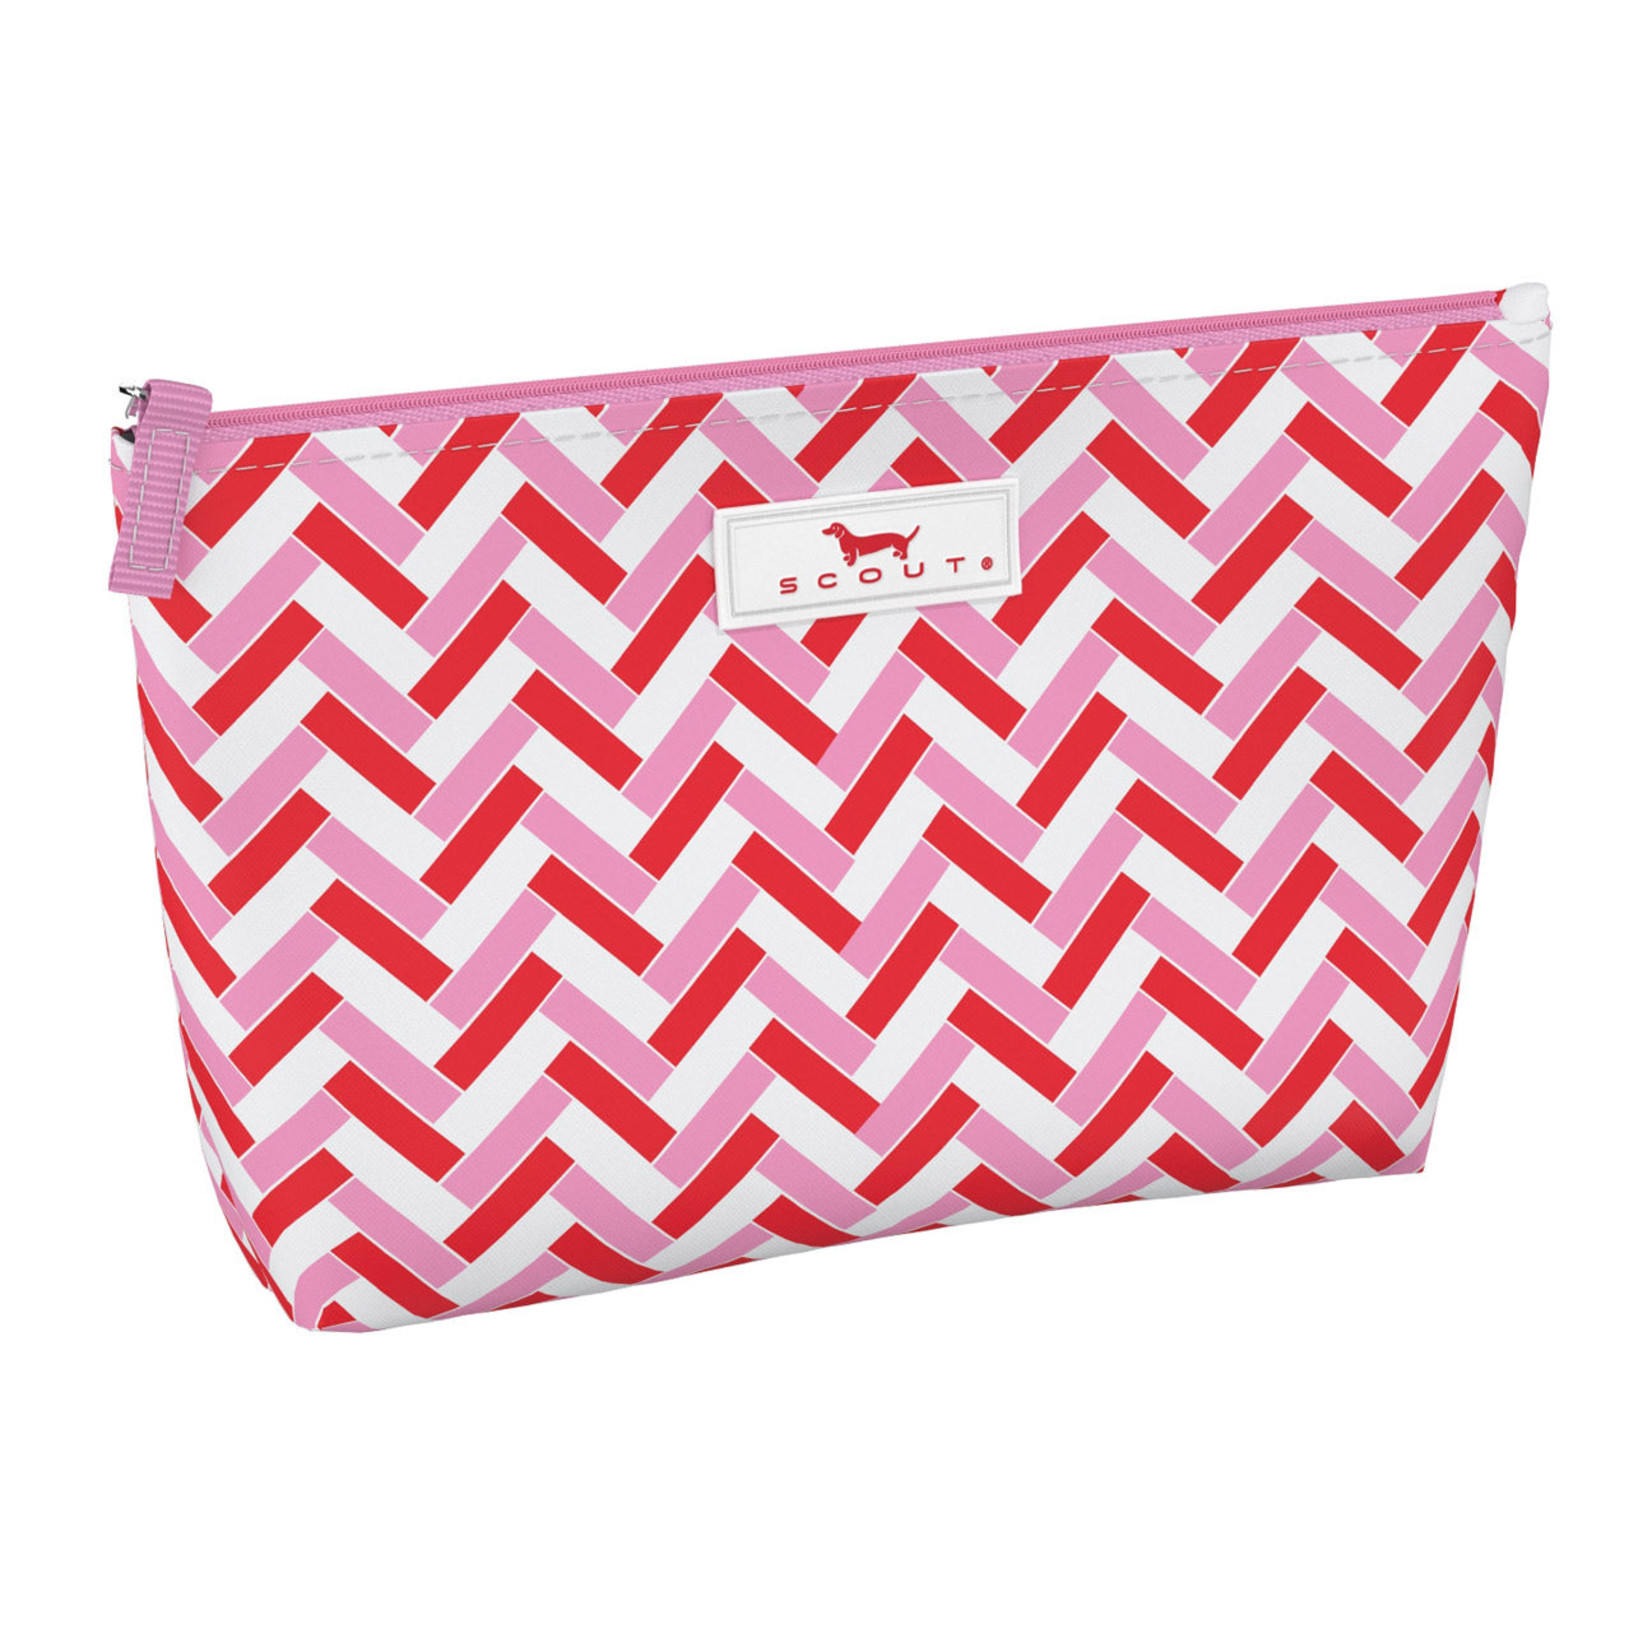 Scout Scout Lovers Lane/Clear Twiggy Makeup Bag